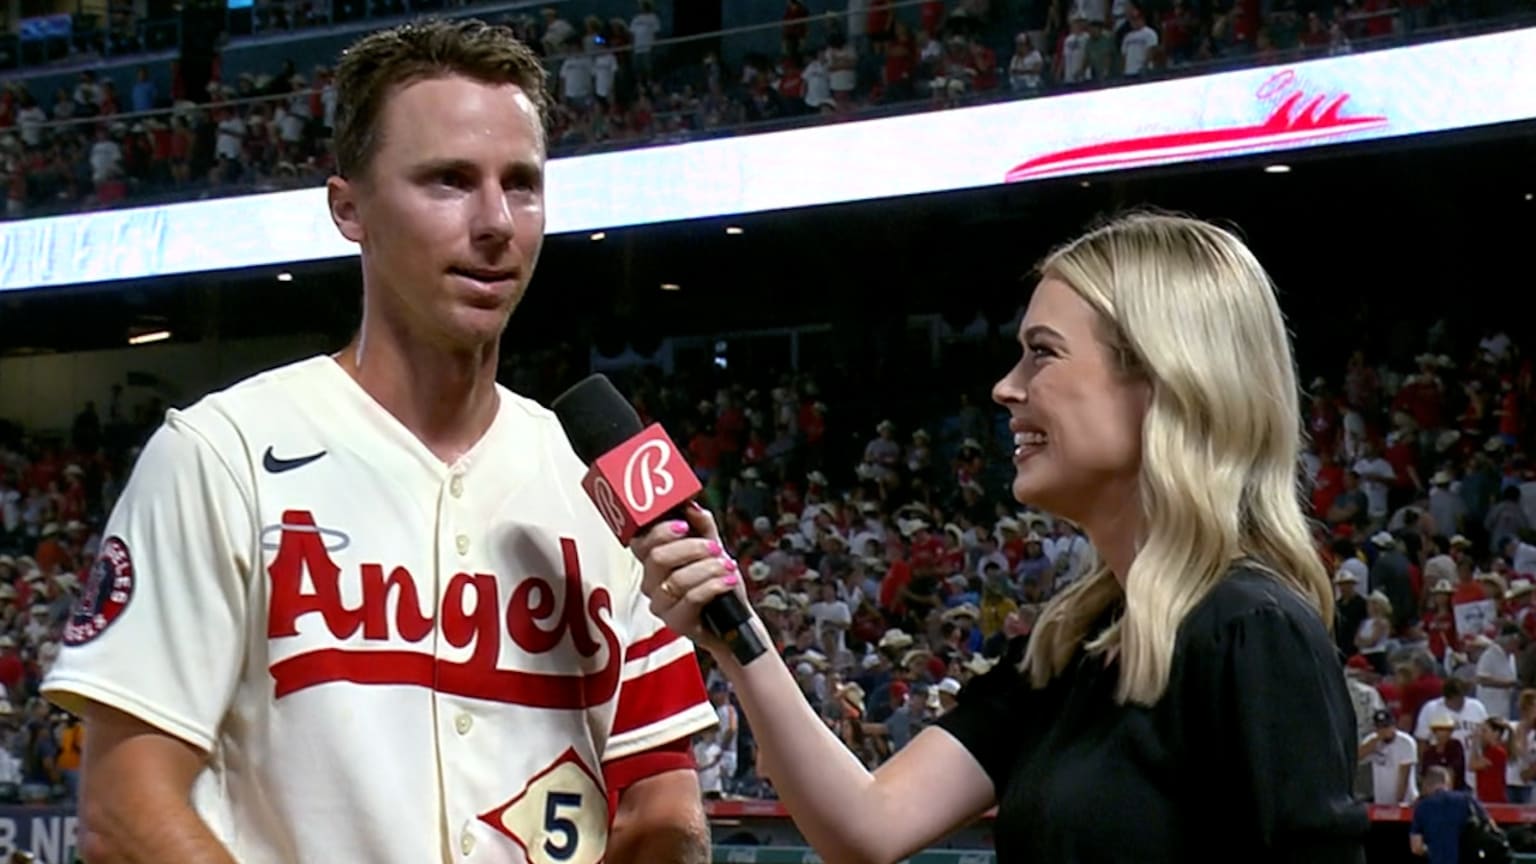 Former Giant Matt Duffy discusses his time in San Francisco